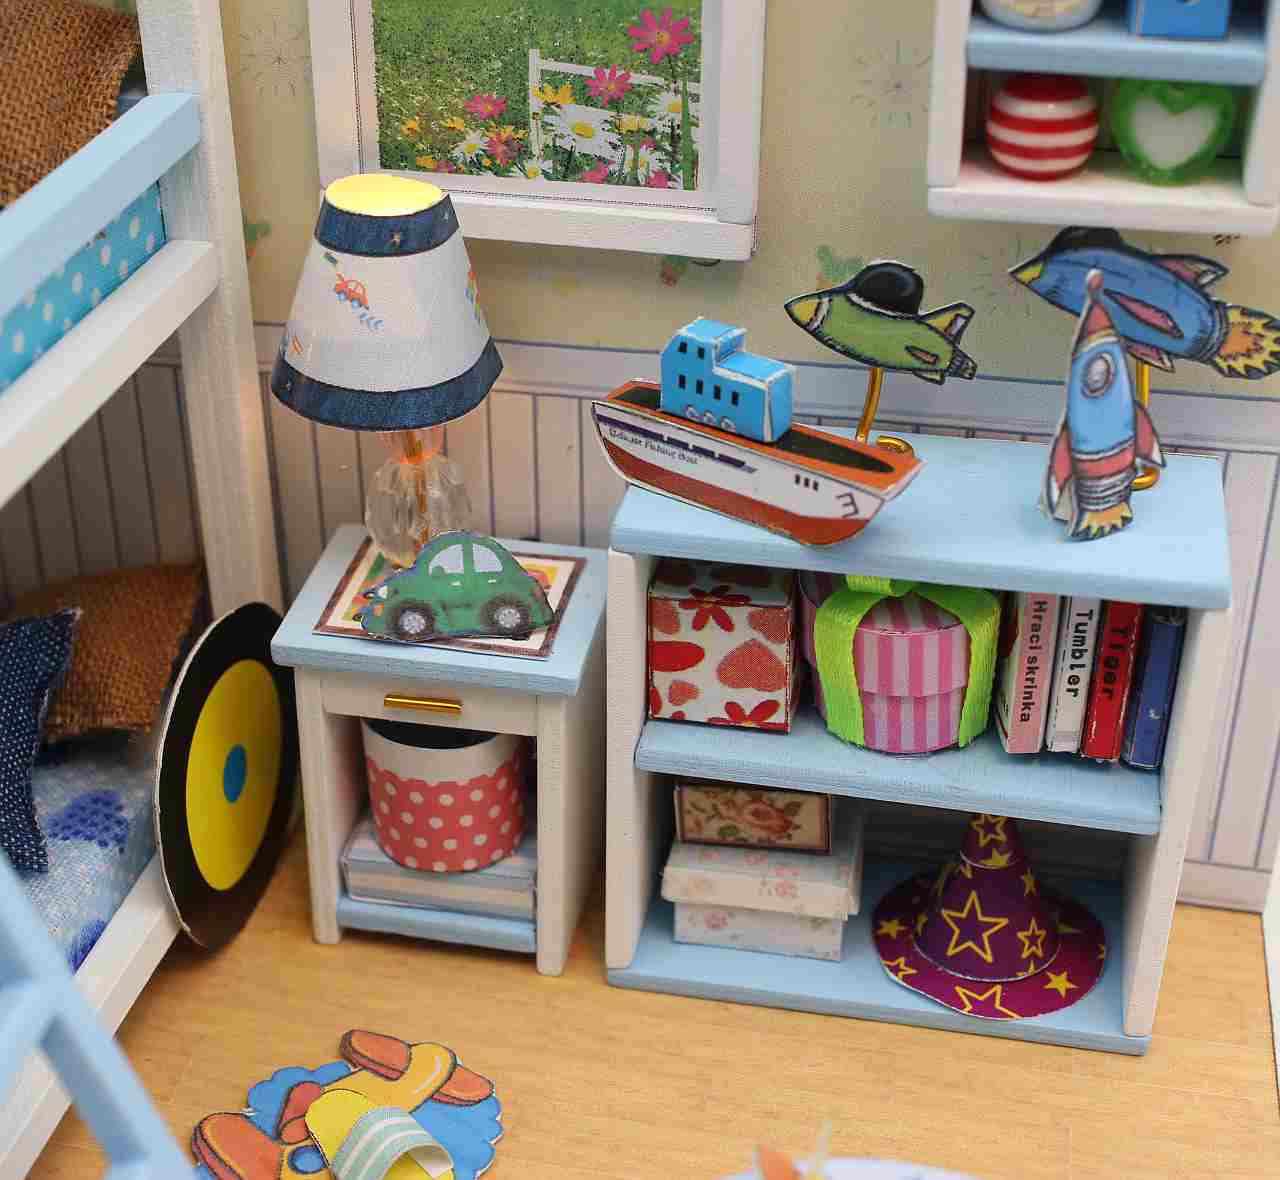 DIY Doll House Furniture Kits Wooden Kids Toy Miniature Dollhouse Handmade Presents for Boy Fun Crafts